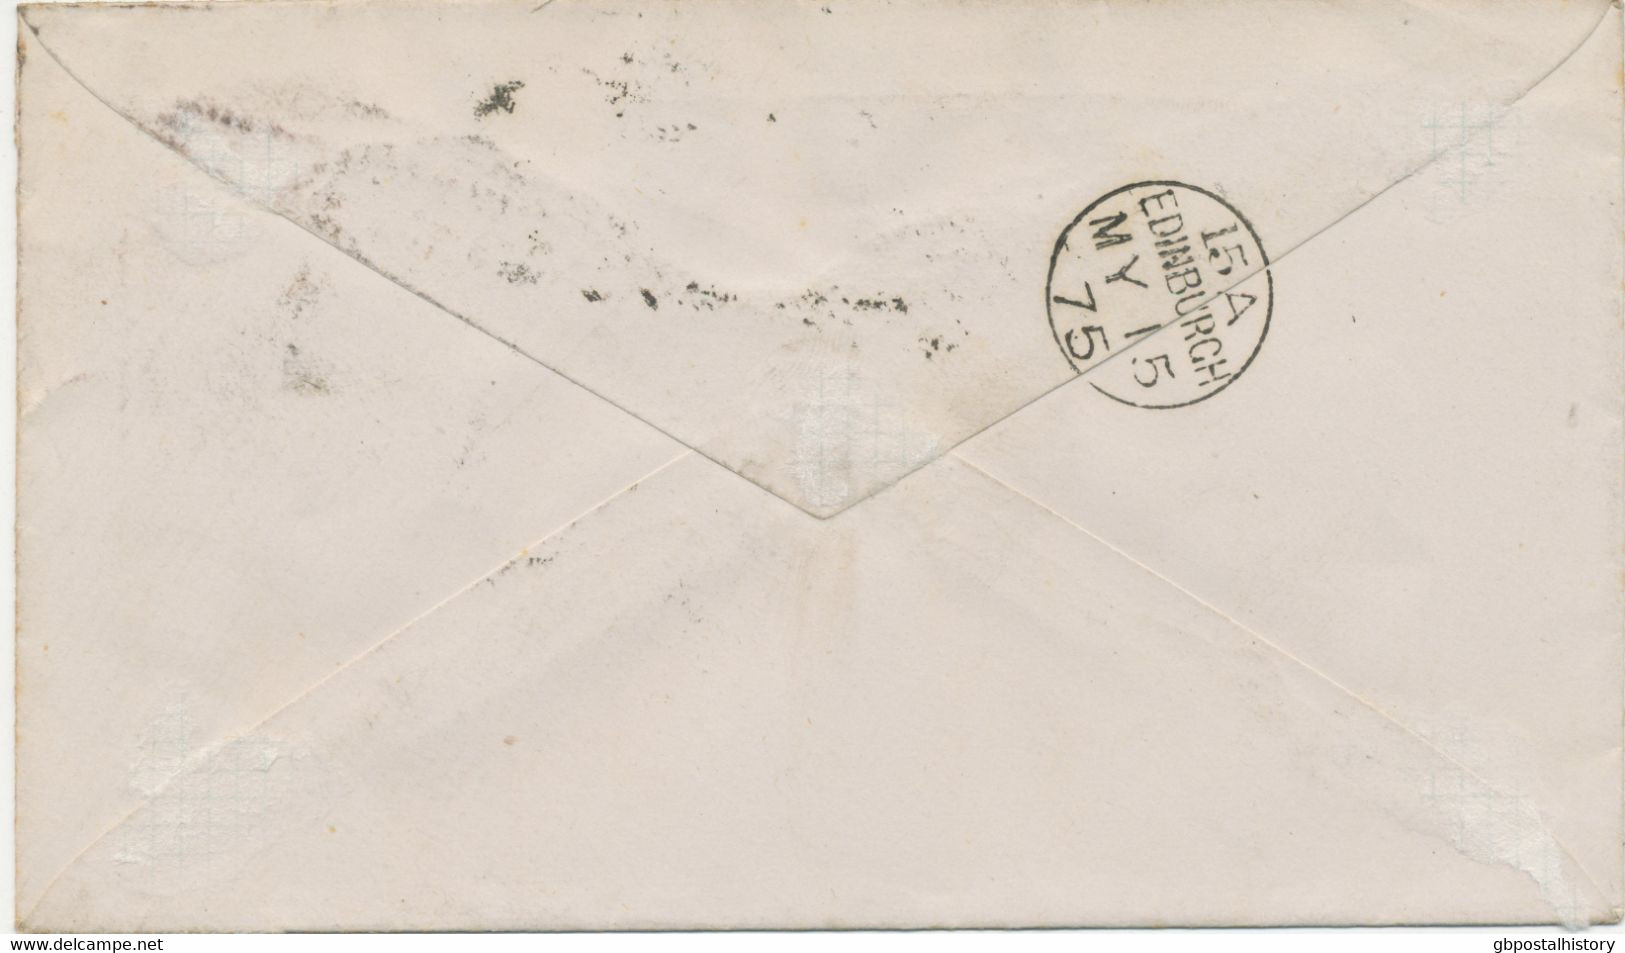 GB „159 / GLASGOW“ Scottish Duplex (4 Bars With Same Length, Time Code „2 &“, Datepart 20mm) On Very Fine Cover - Cartas & Documentos